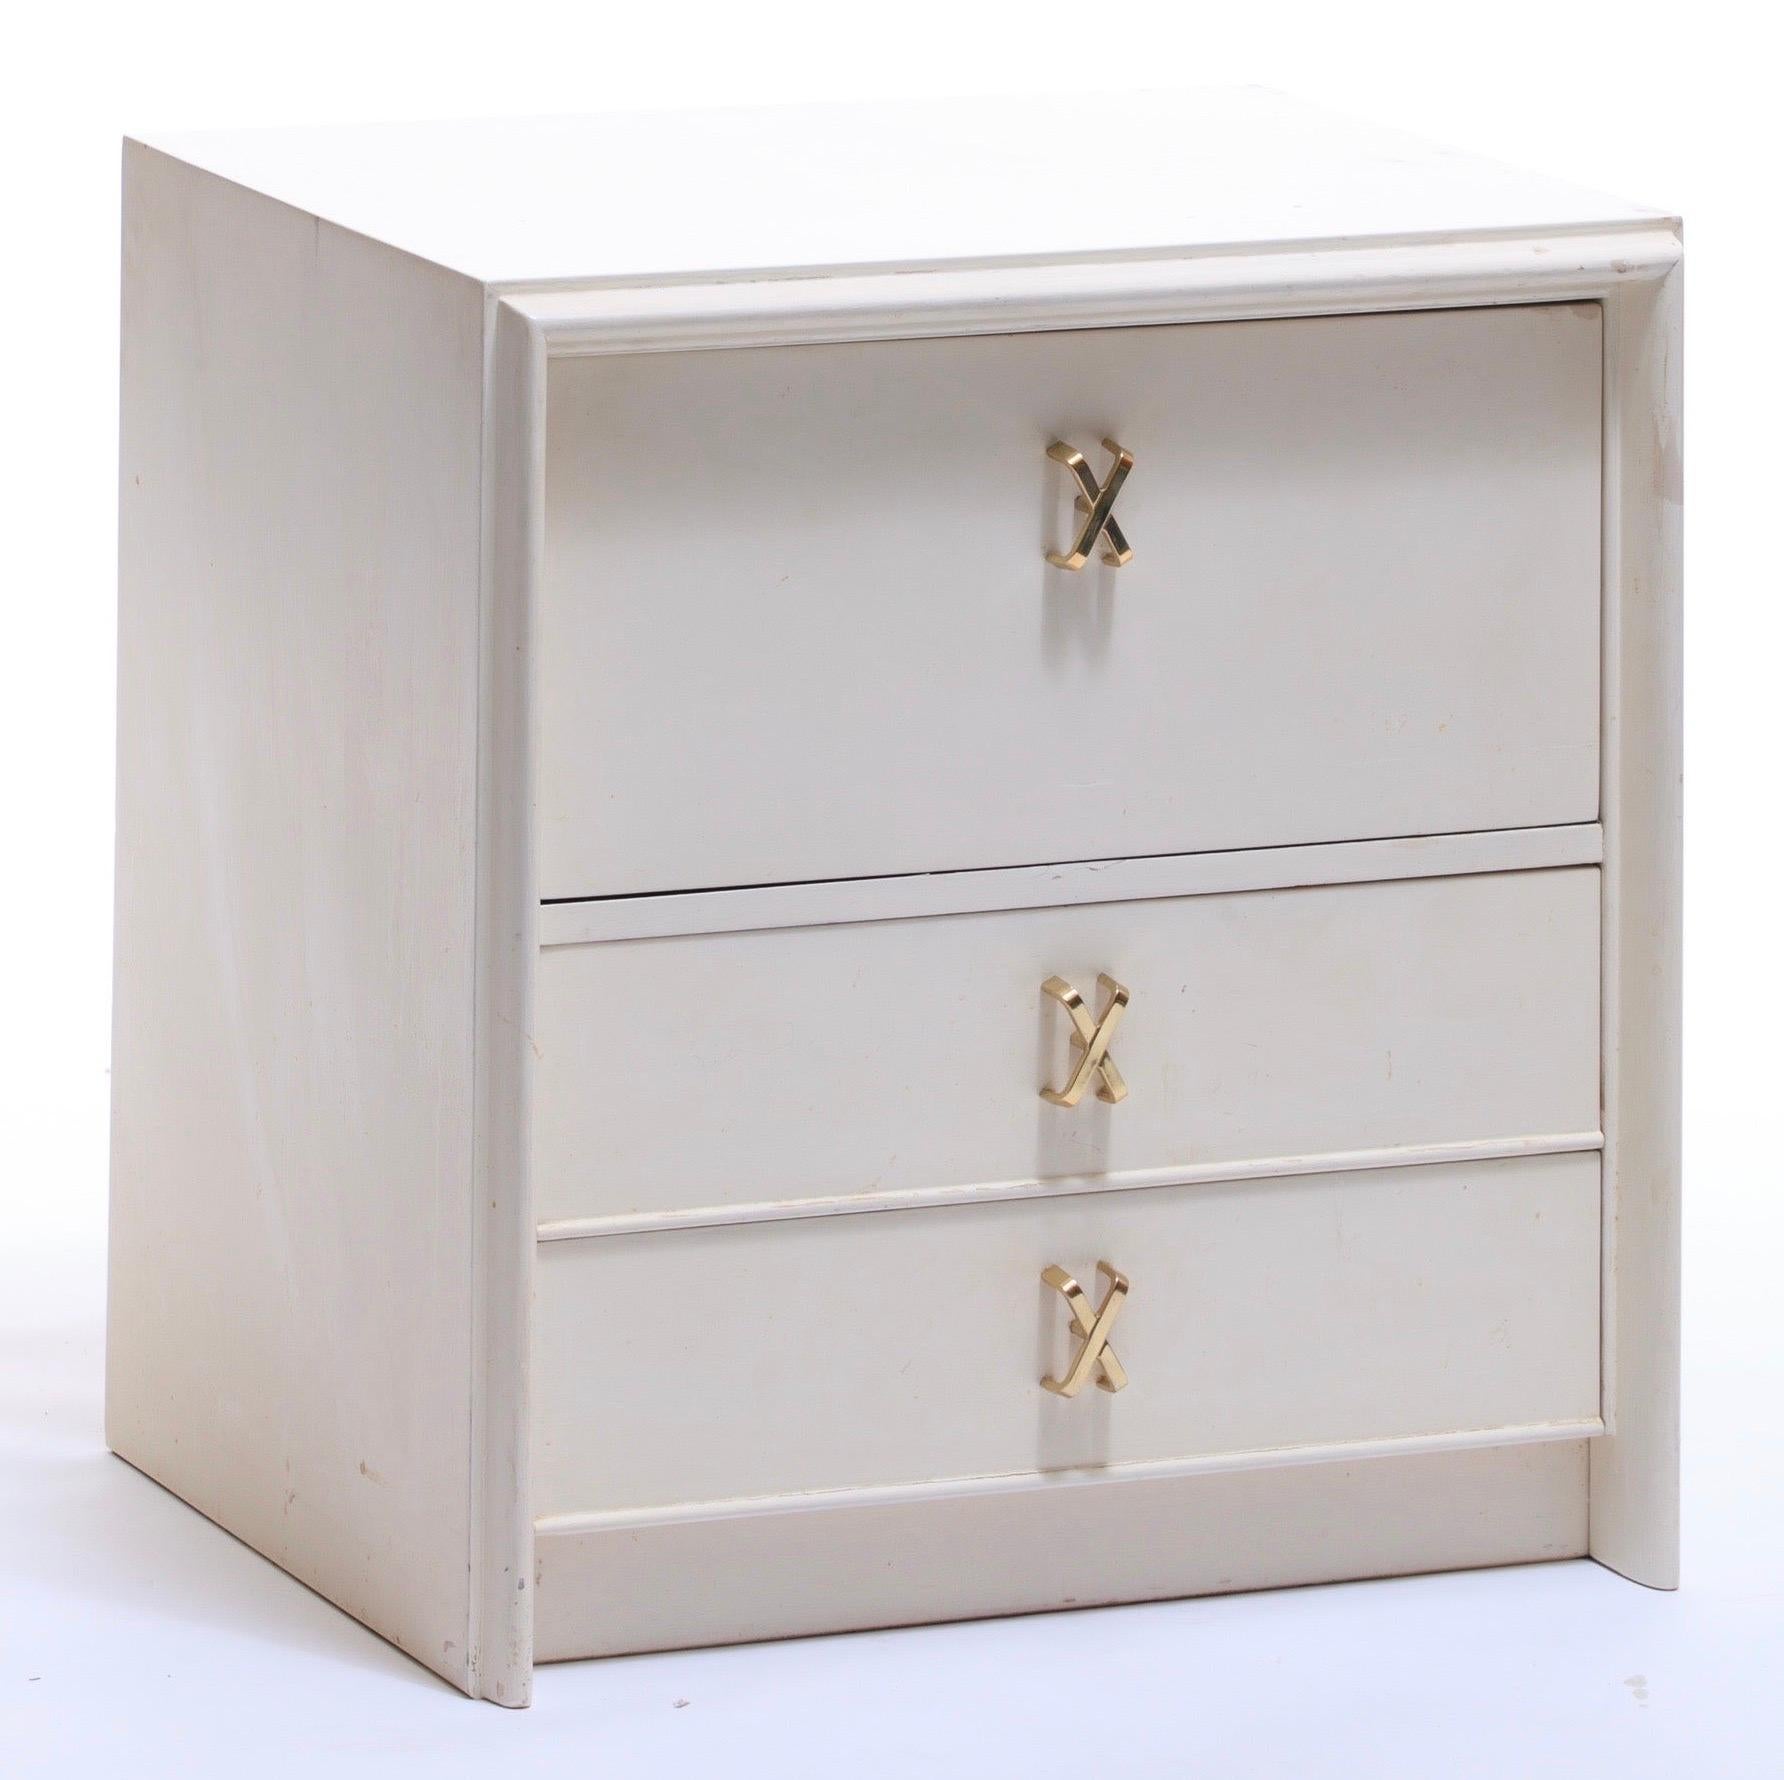 Pair of Paul Frankl Ivory Lacquered Nightstands with Brass X Pulls, circa 1950 In Good Condition For Sale In Saint Louis, MO